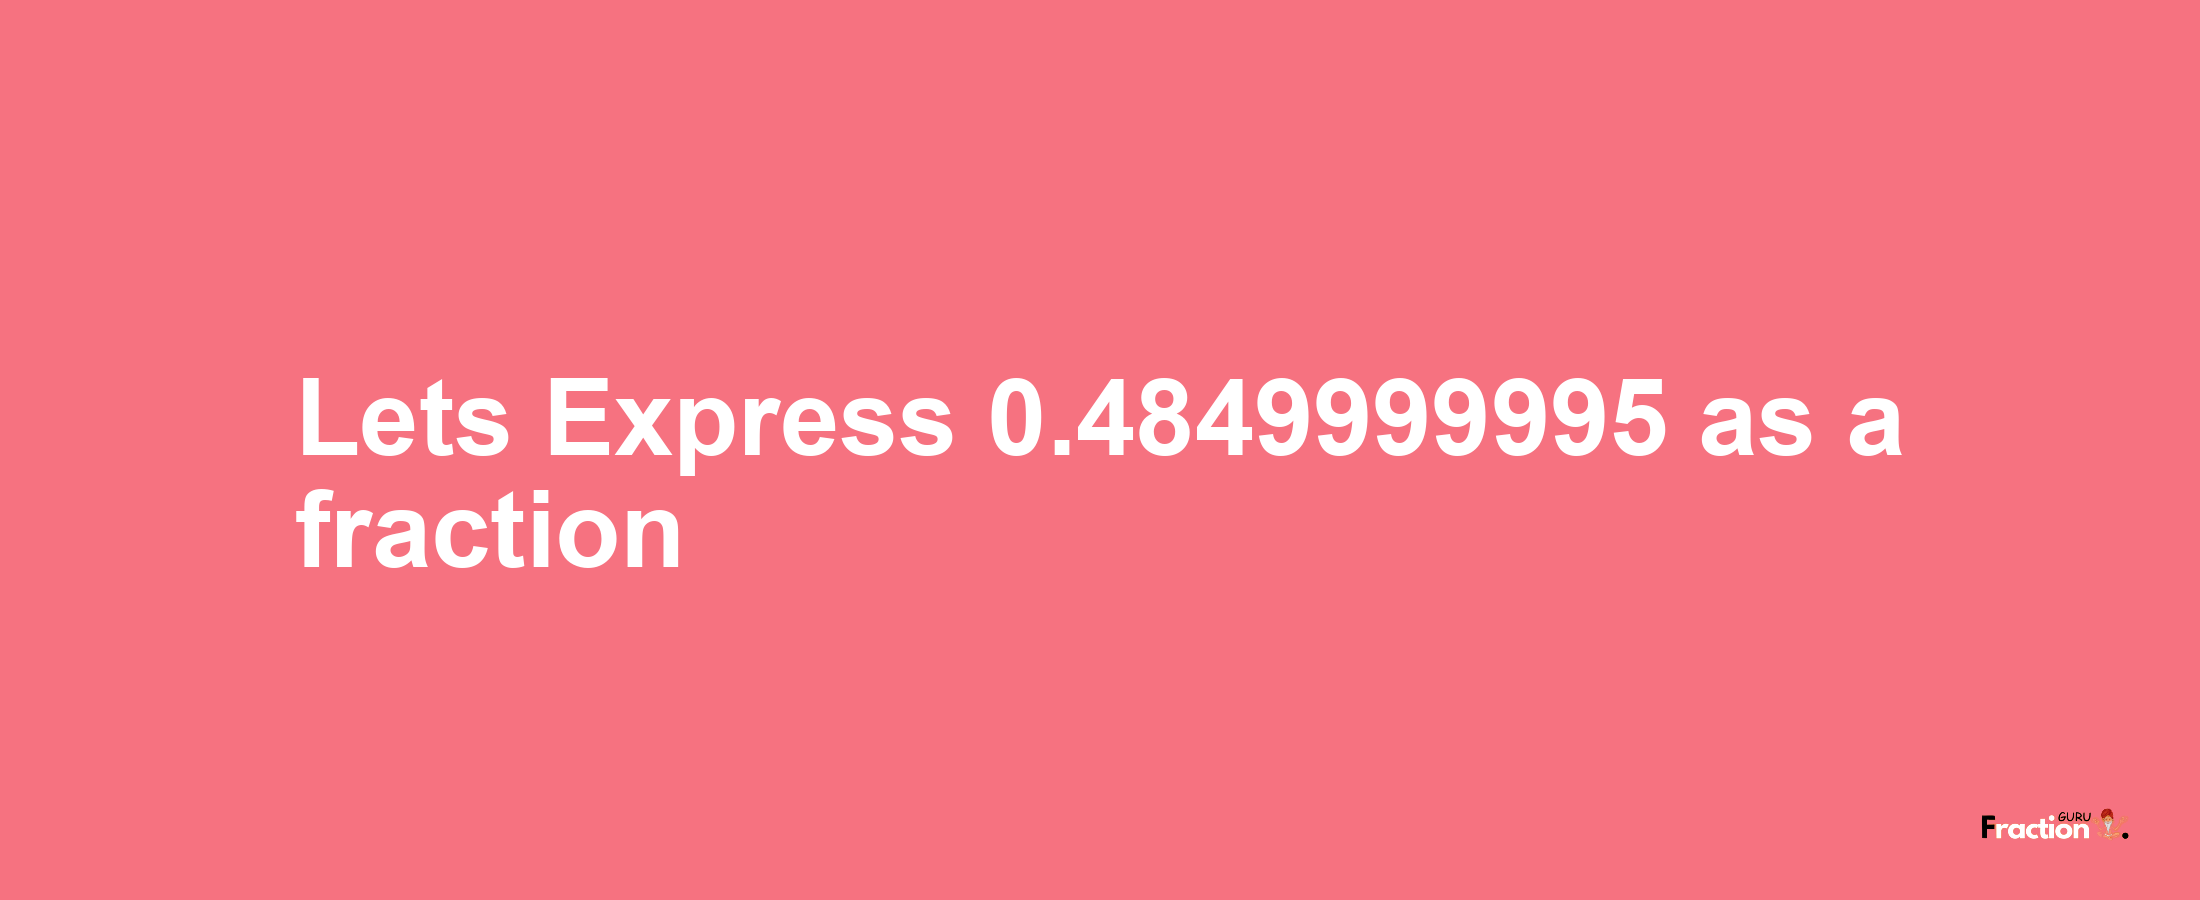 Lets Express 0.4849999995 as afraction